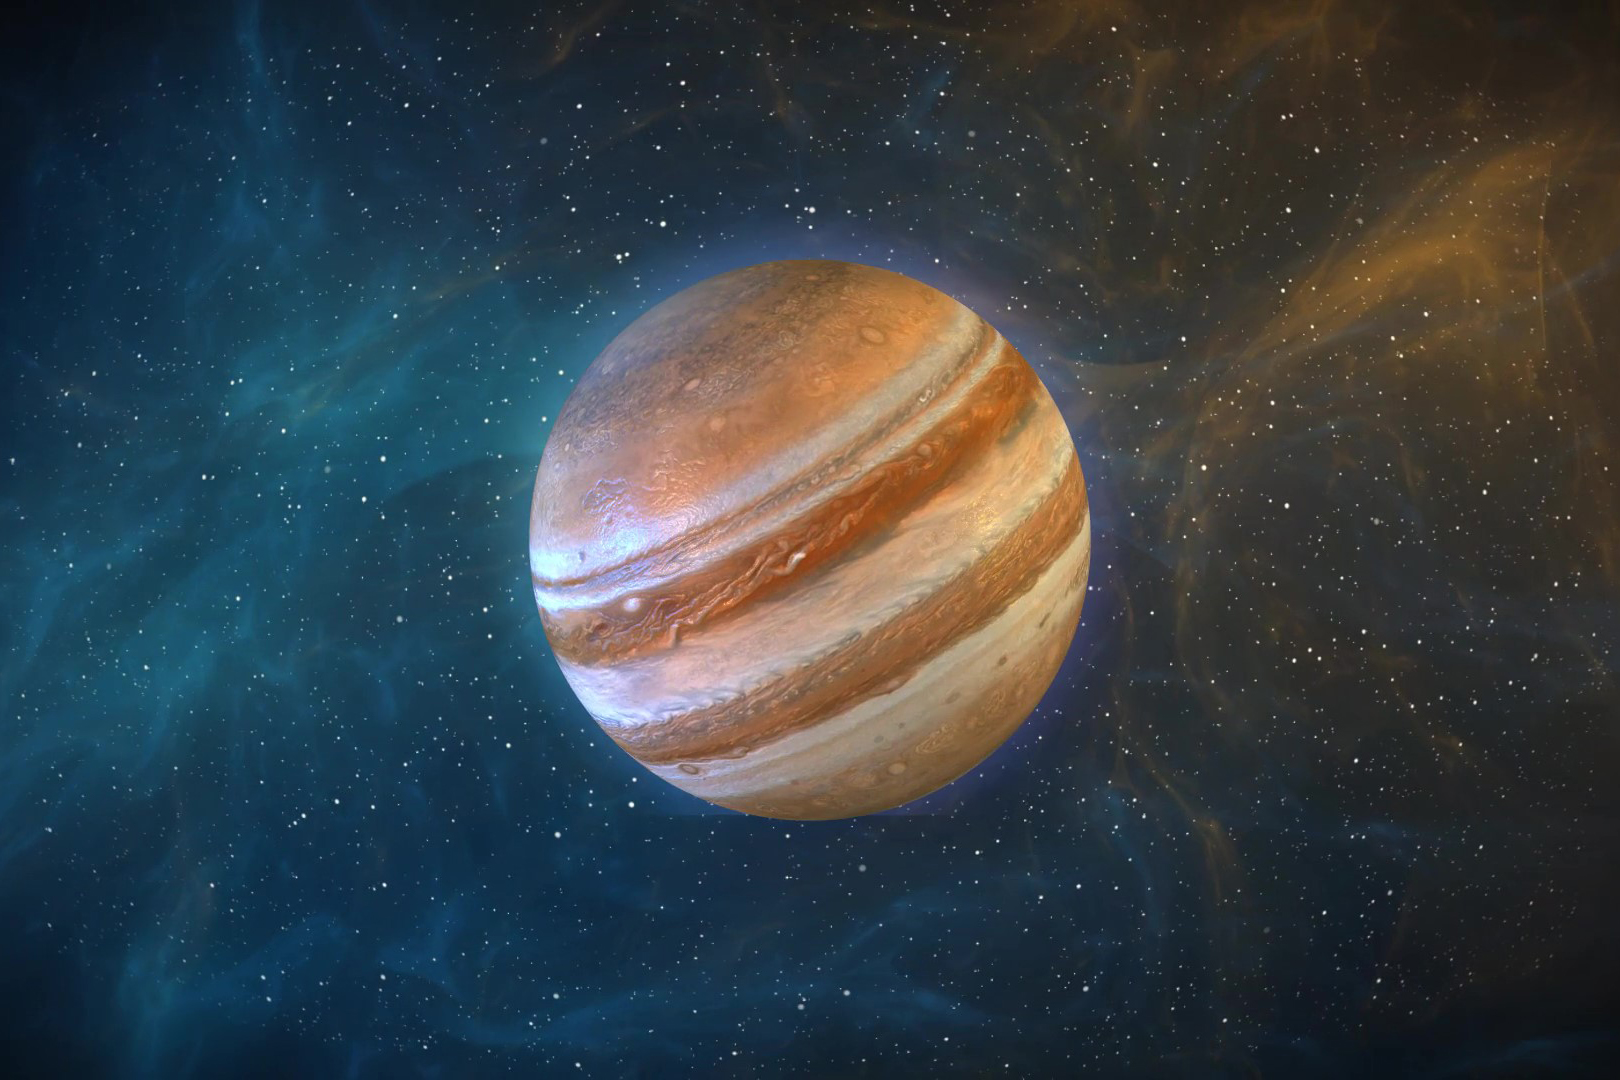 TELESCOPES AND BINOS AT THE READY | JUPITER IS AT ITS CLOSEST TO EARTH IN 59 YEARS